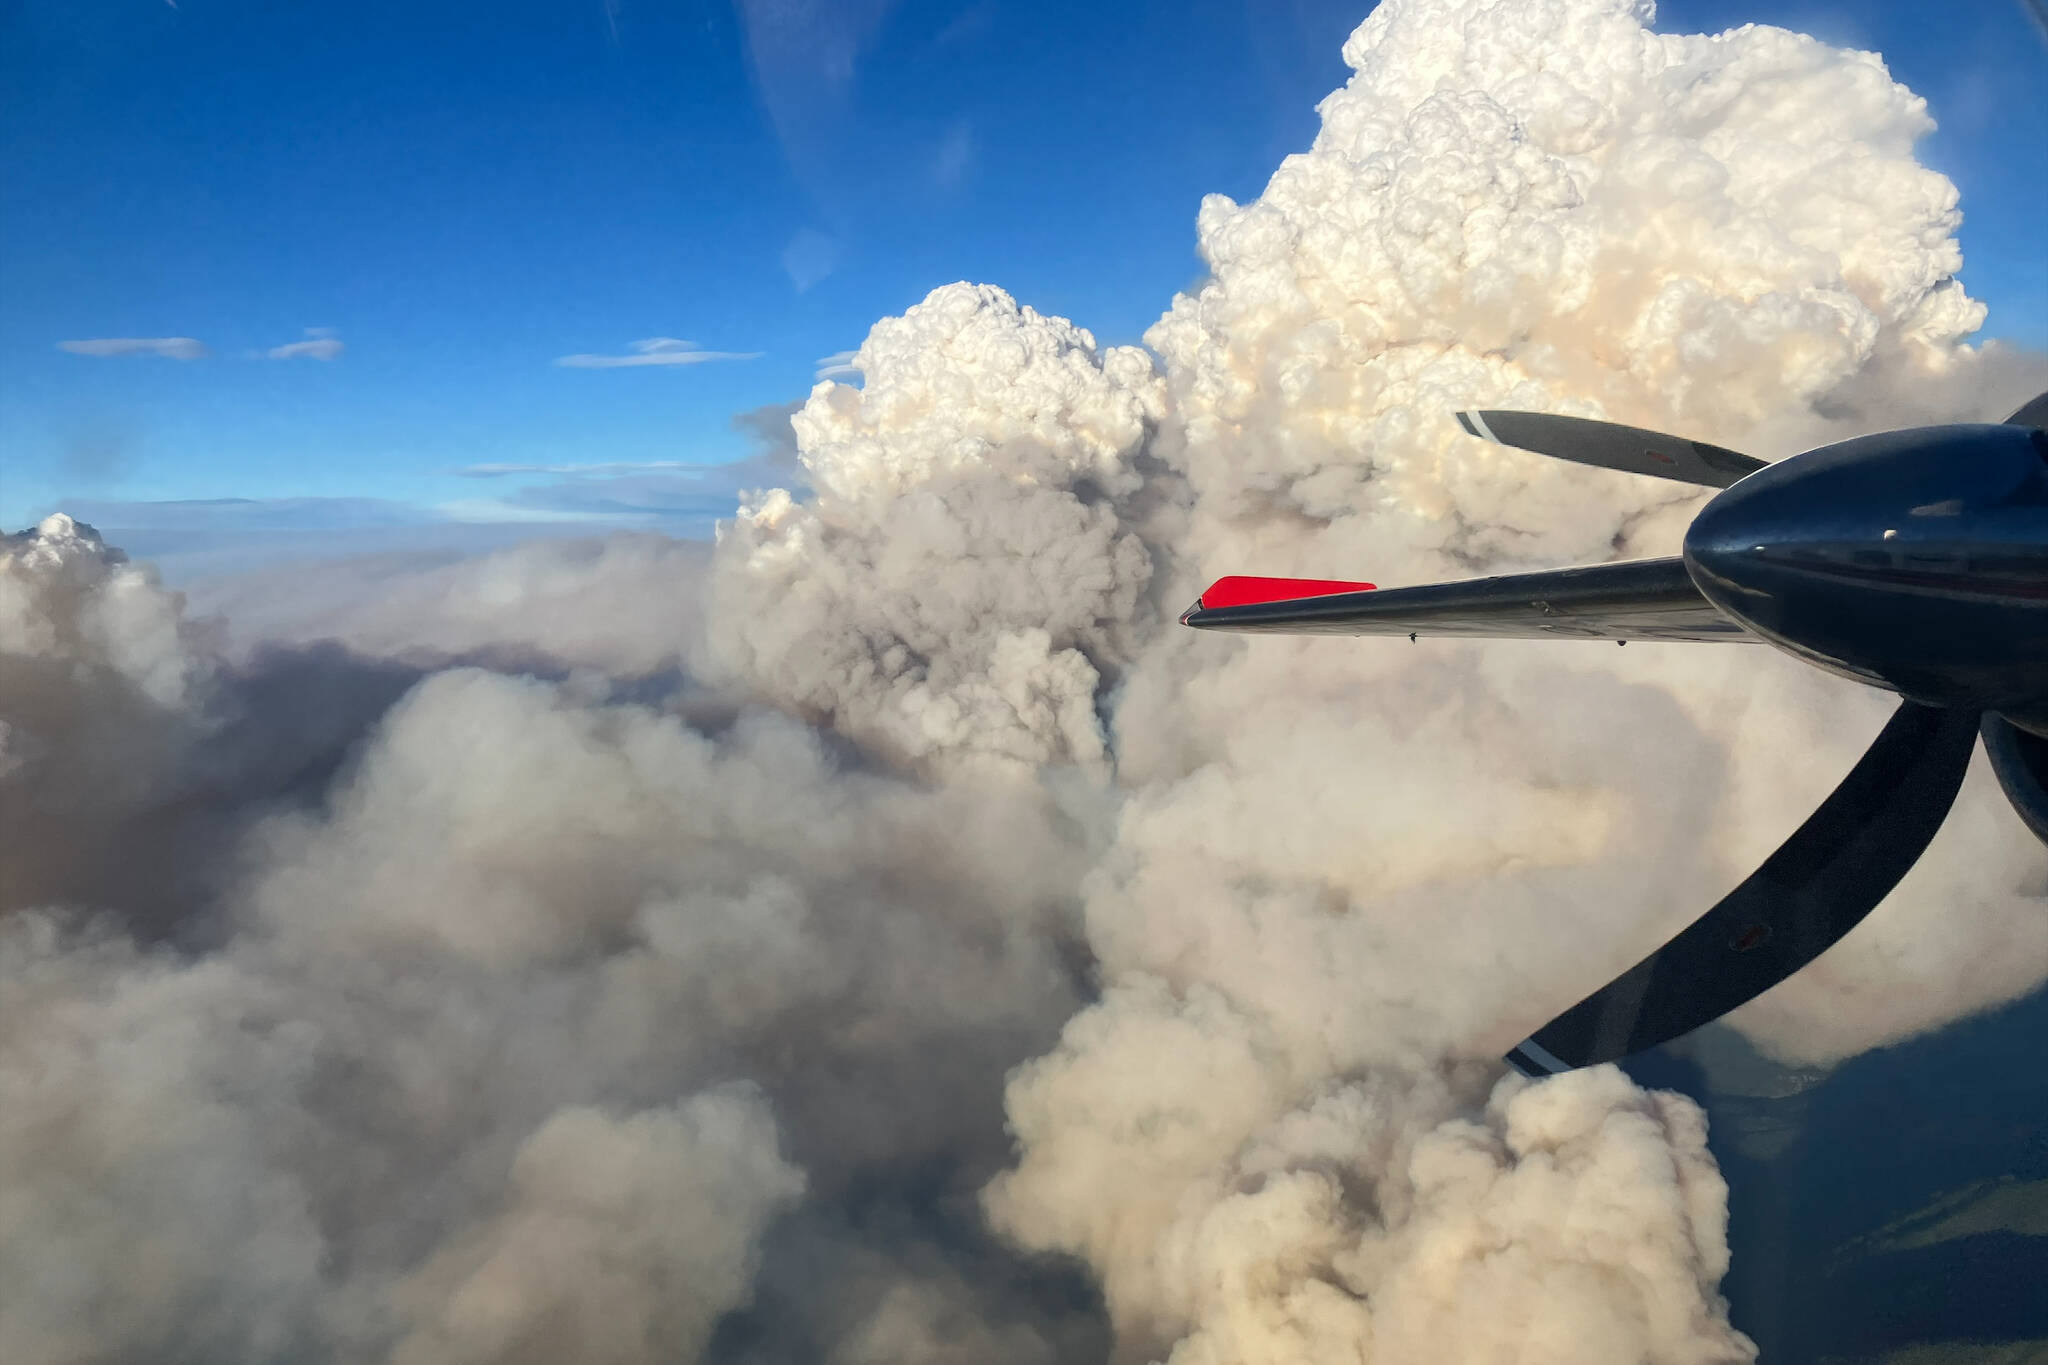 BC Wildfire Service personnel, wildfire crews and local firefighters have been battling more than 300 active wildfires in the province. (BC Wildfire Service photo)